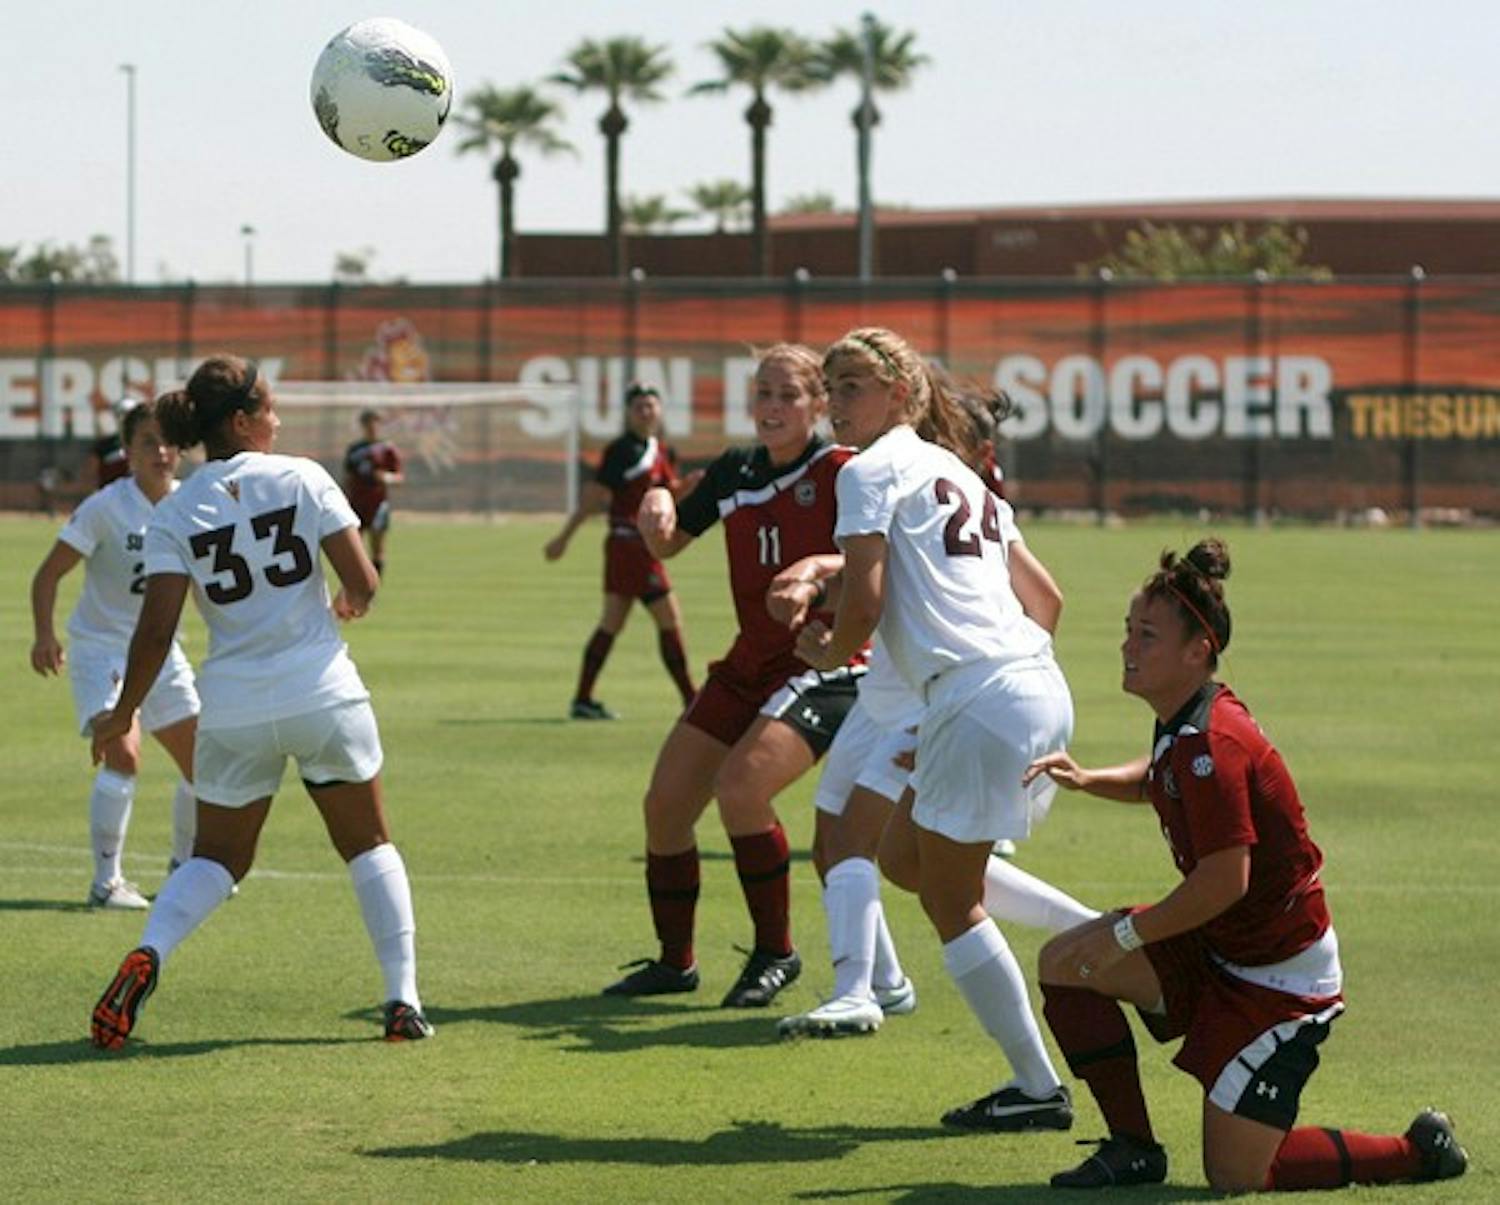 OPEN FIELD: ASU sophomore defender Kaitlyn Pavlovich (24) tracks the ball along with two South Carolina defenders during the Sun Devils’ close 1-0 win over the Gamecocks on Sunday. Pavlovich and the rest of the team travel to Virginia to take on the Cavaliers on Friday. (Photo by Michaela Mader)